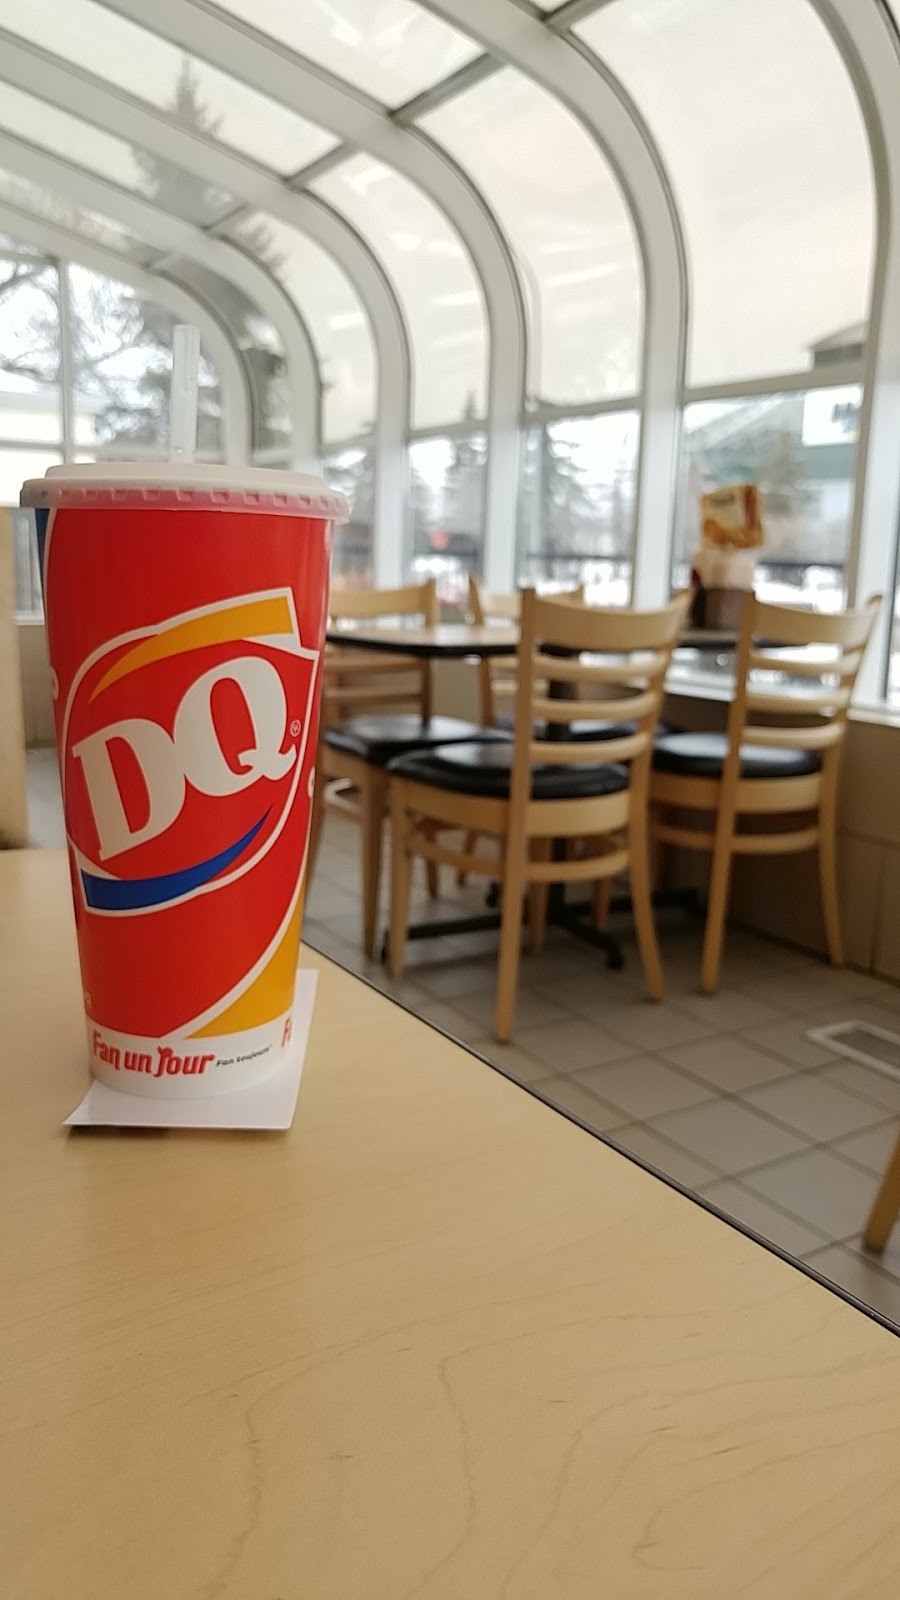 Dairy Queen Grill & Chill | restaurant | 1916 Elphinstone St, Regina, SK S4T 3N2, Canada | 3065650099 OR +1 306-565-0099